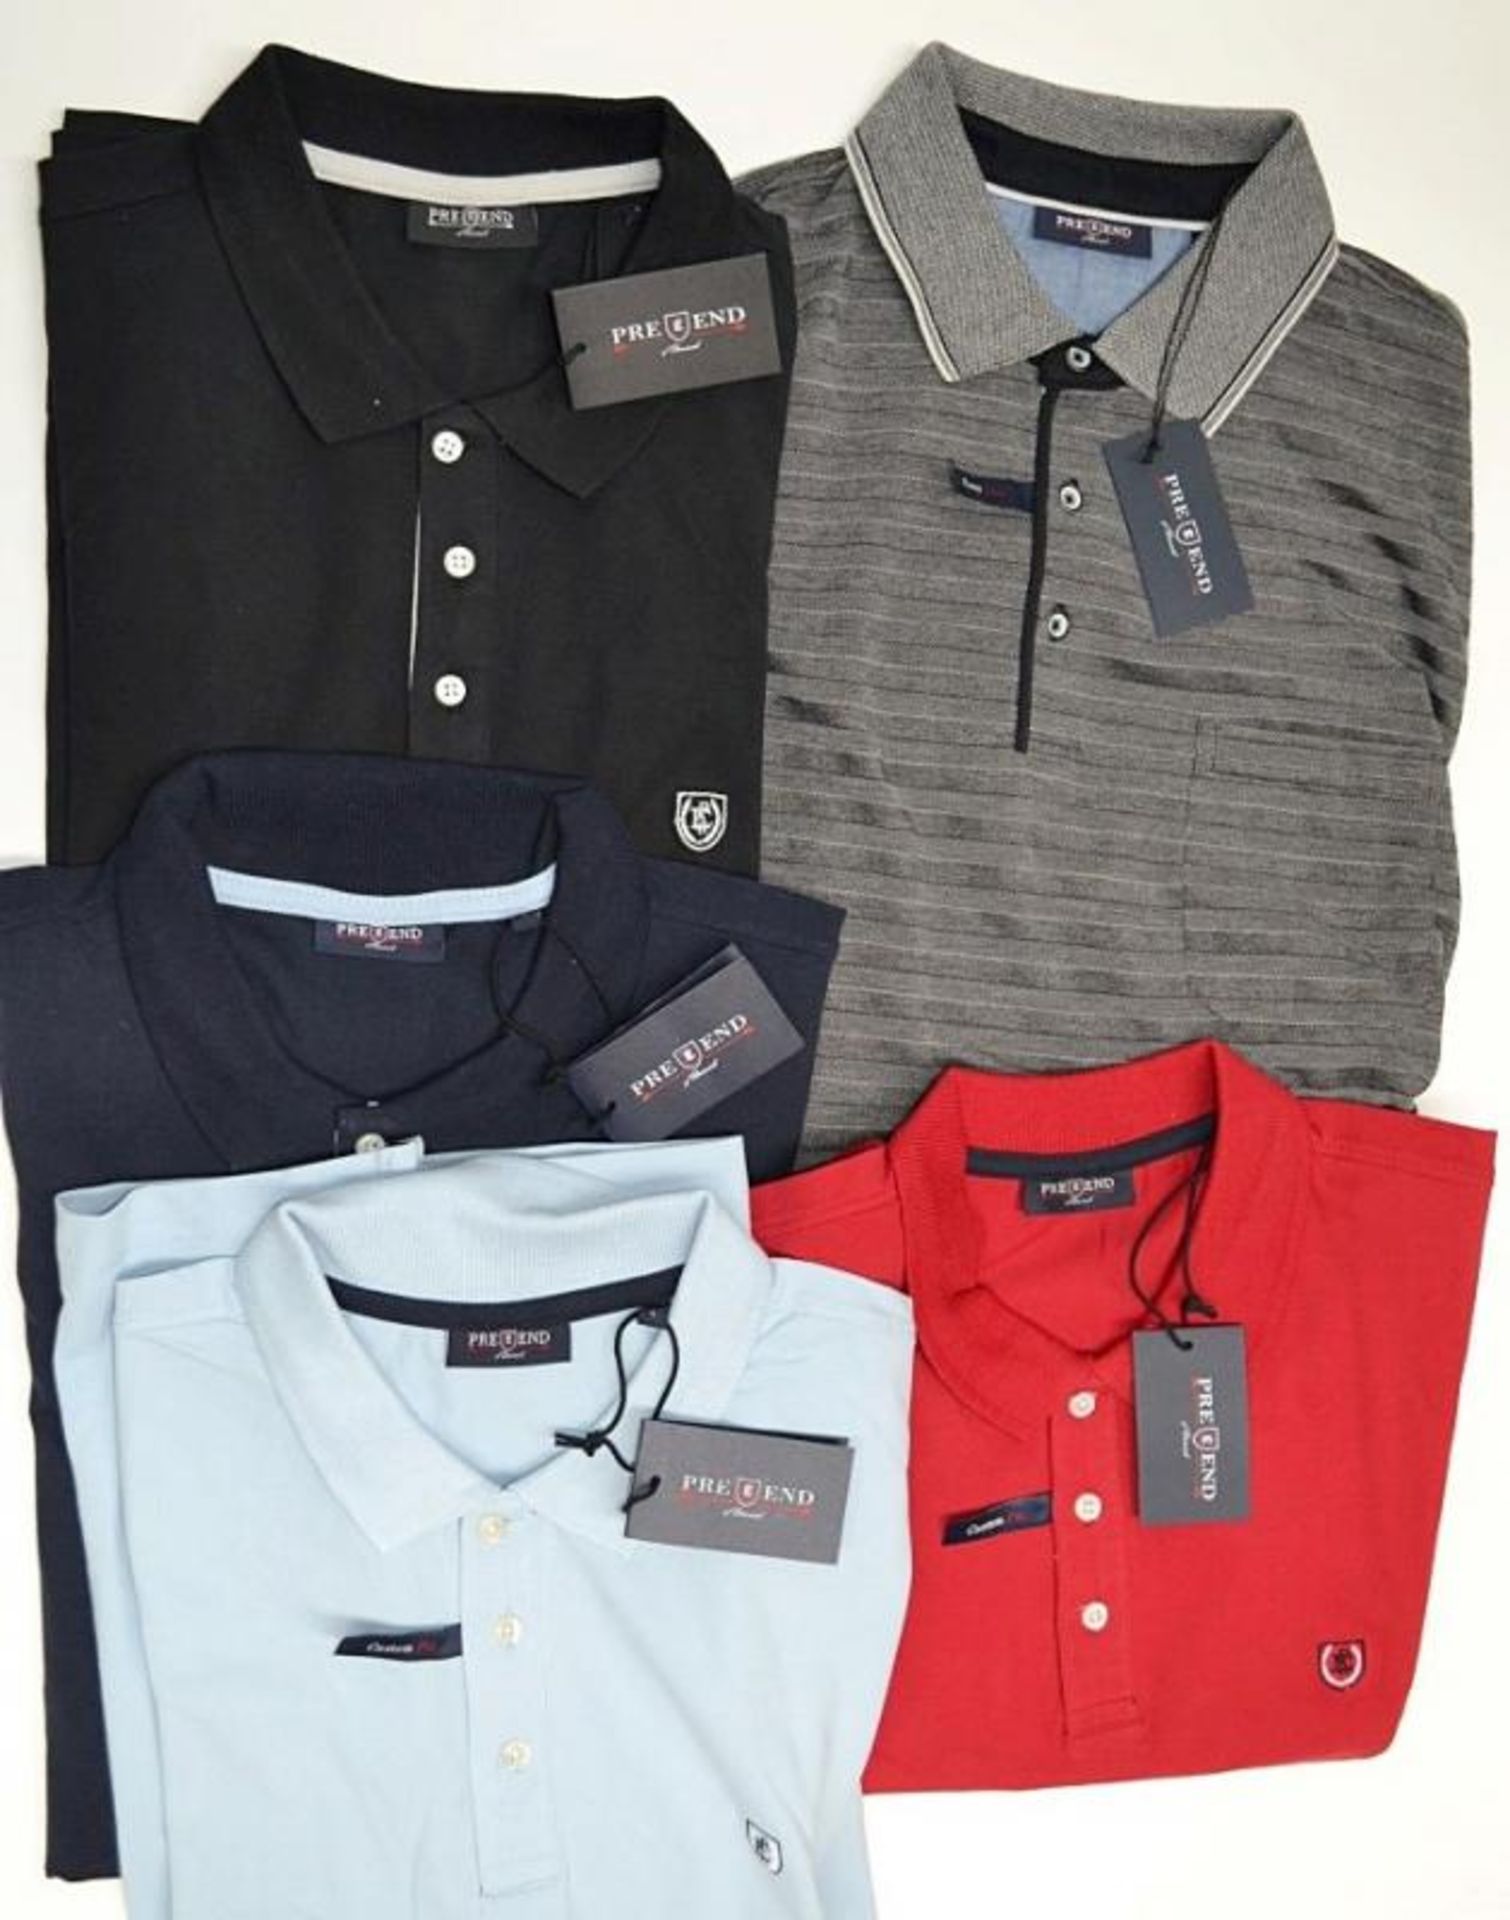 5 x Assorted Pre End Branded Mens Short Sleeve Polo Shirts - New Stock With Tags - Recent Retail - Image 2 of 4